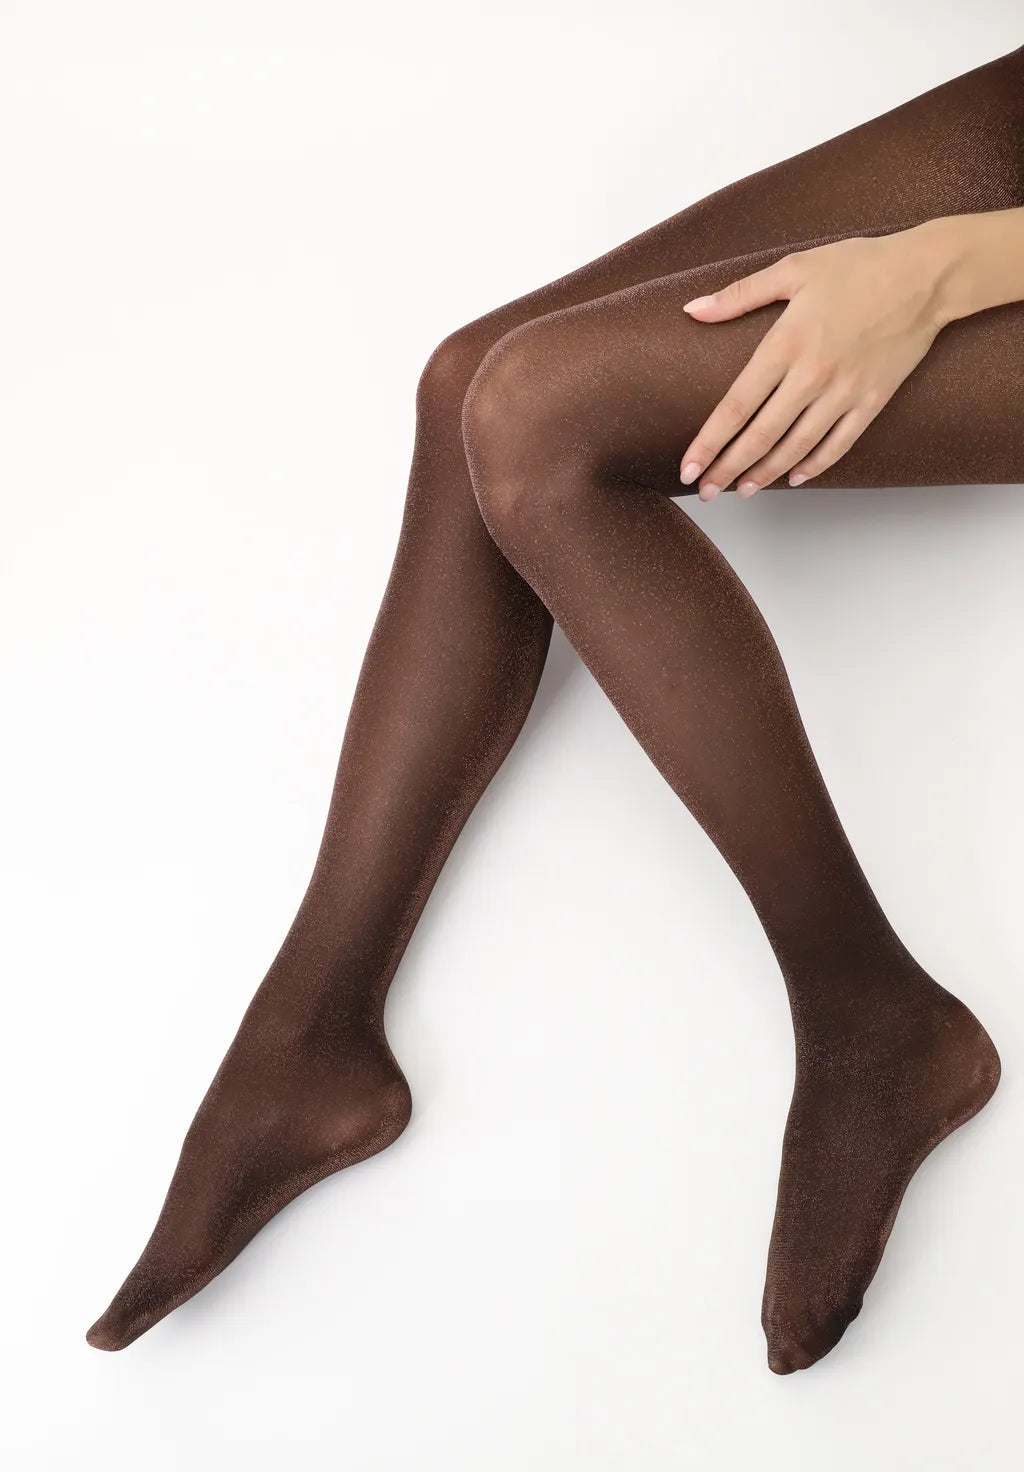 OroblÌ_ Diamonds Tights - Black semi opaque lam̩ tights with bronze sparkly metallic yarn woven throughout, perfect for party season.